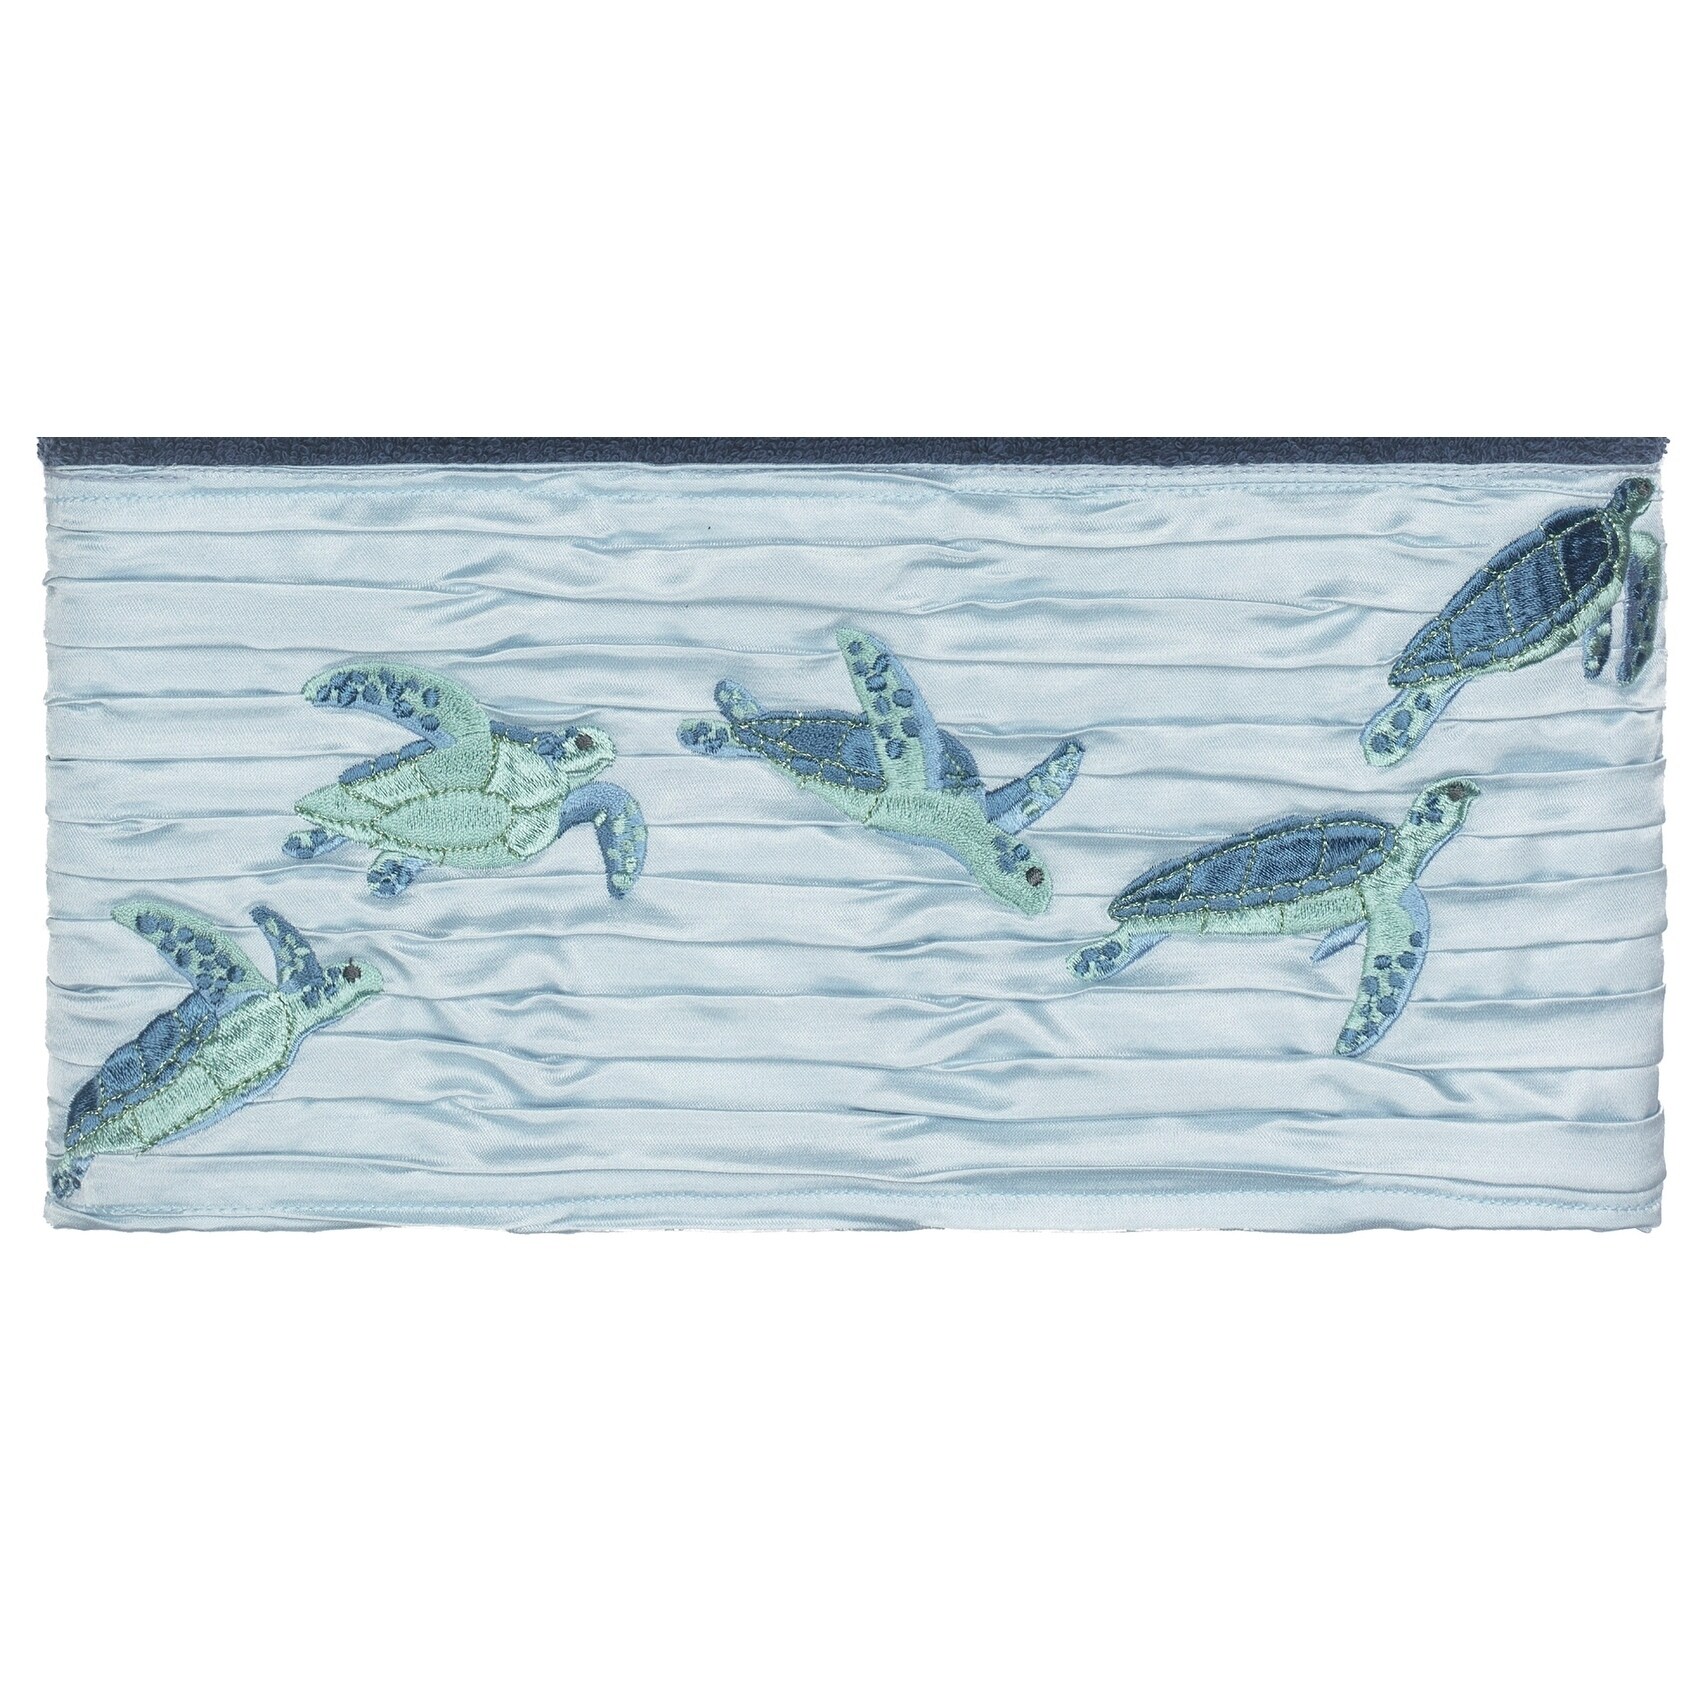 Authentic Hotel and Spa Turkish Cotton Turtles Embroidered Midnight Blue Bath Towel